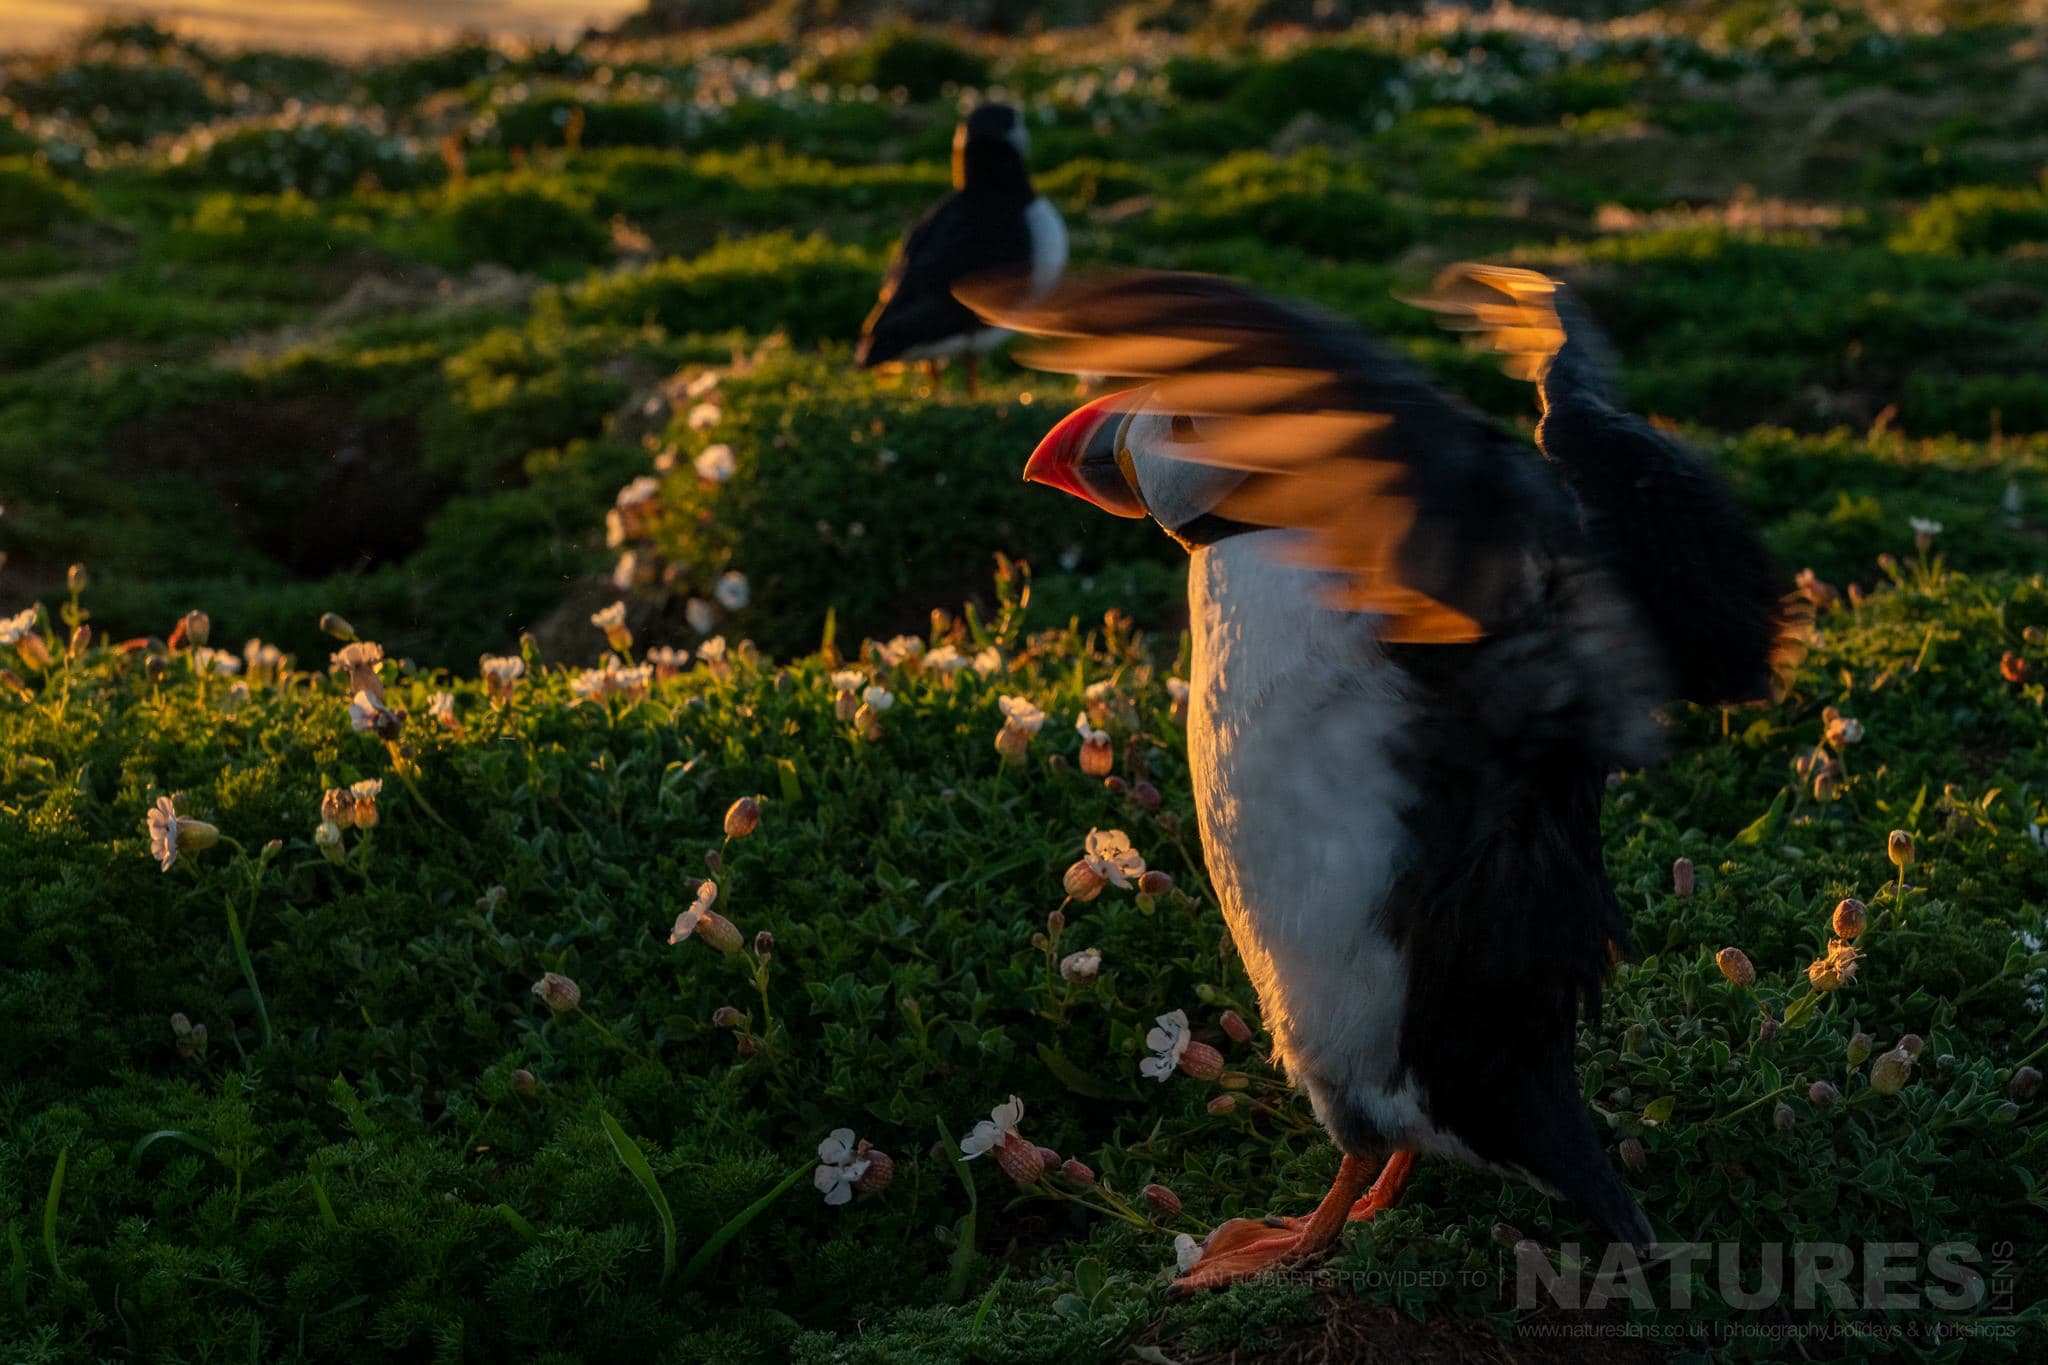 One Of The Island's Puffins With It's Wings Illuminated From Behind This Image Was Captured By Ian Roberts During The Natureslens Welsh Puffins Of Skomer Island Photography Holiday